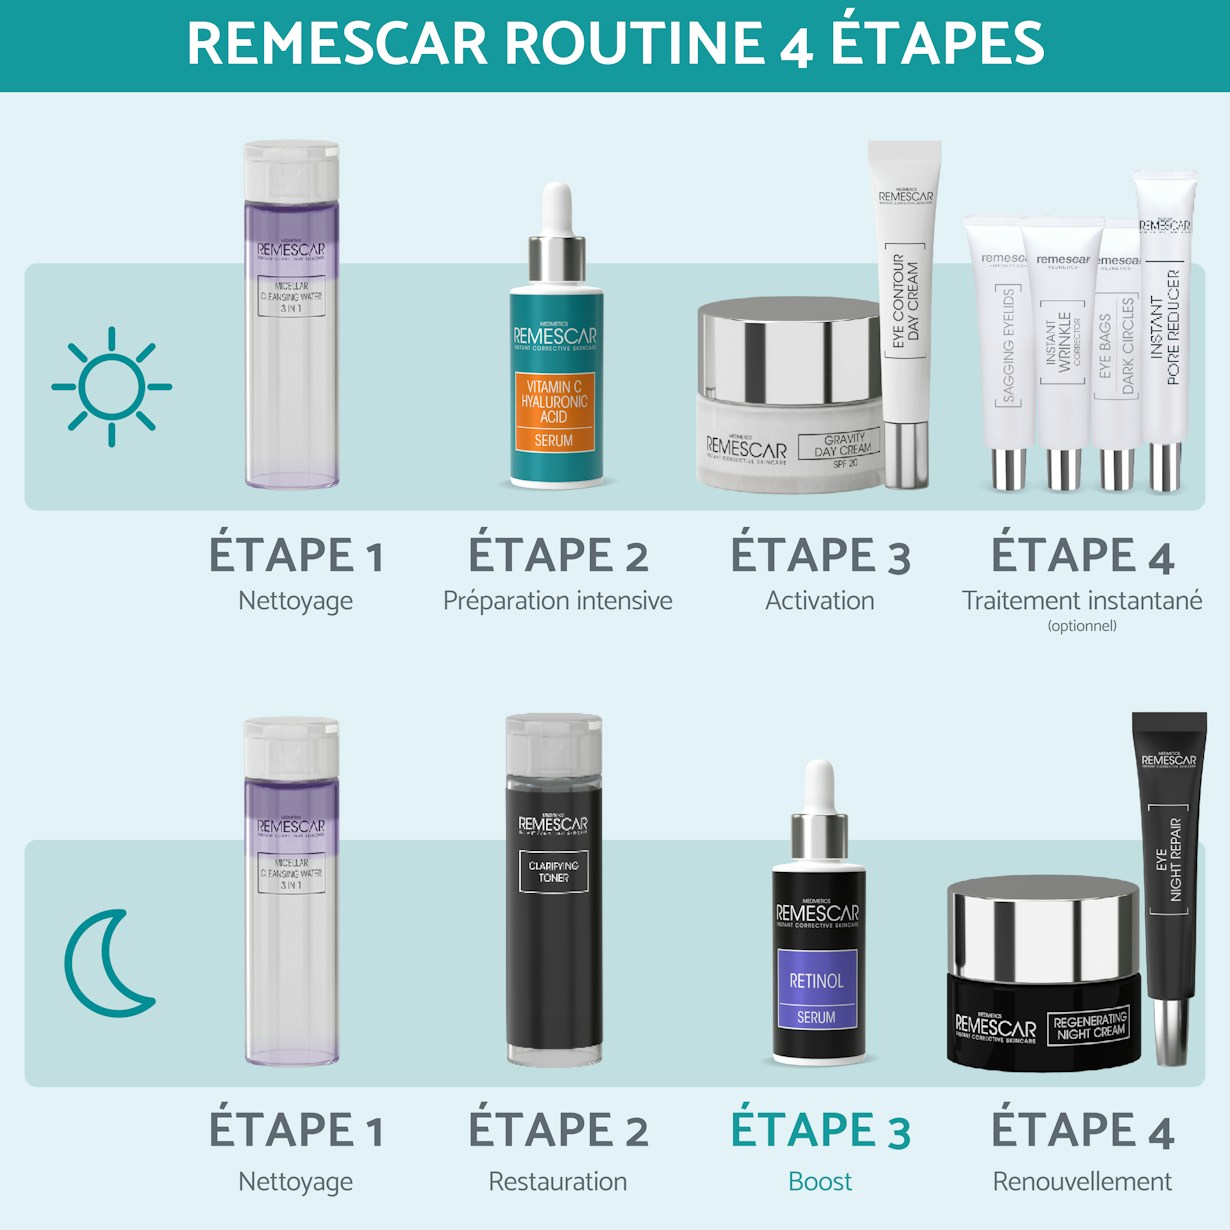 Remescar pdp pictures website and amazon 2000x2000px retinol serum FR6